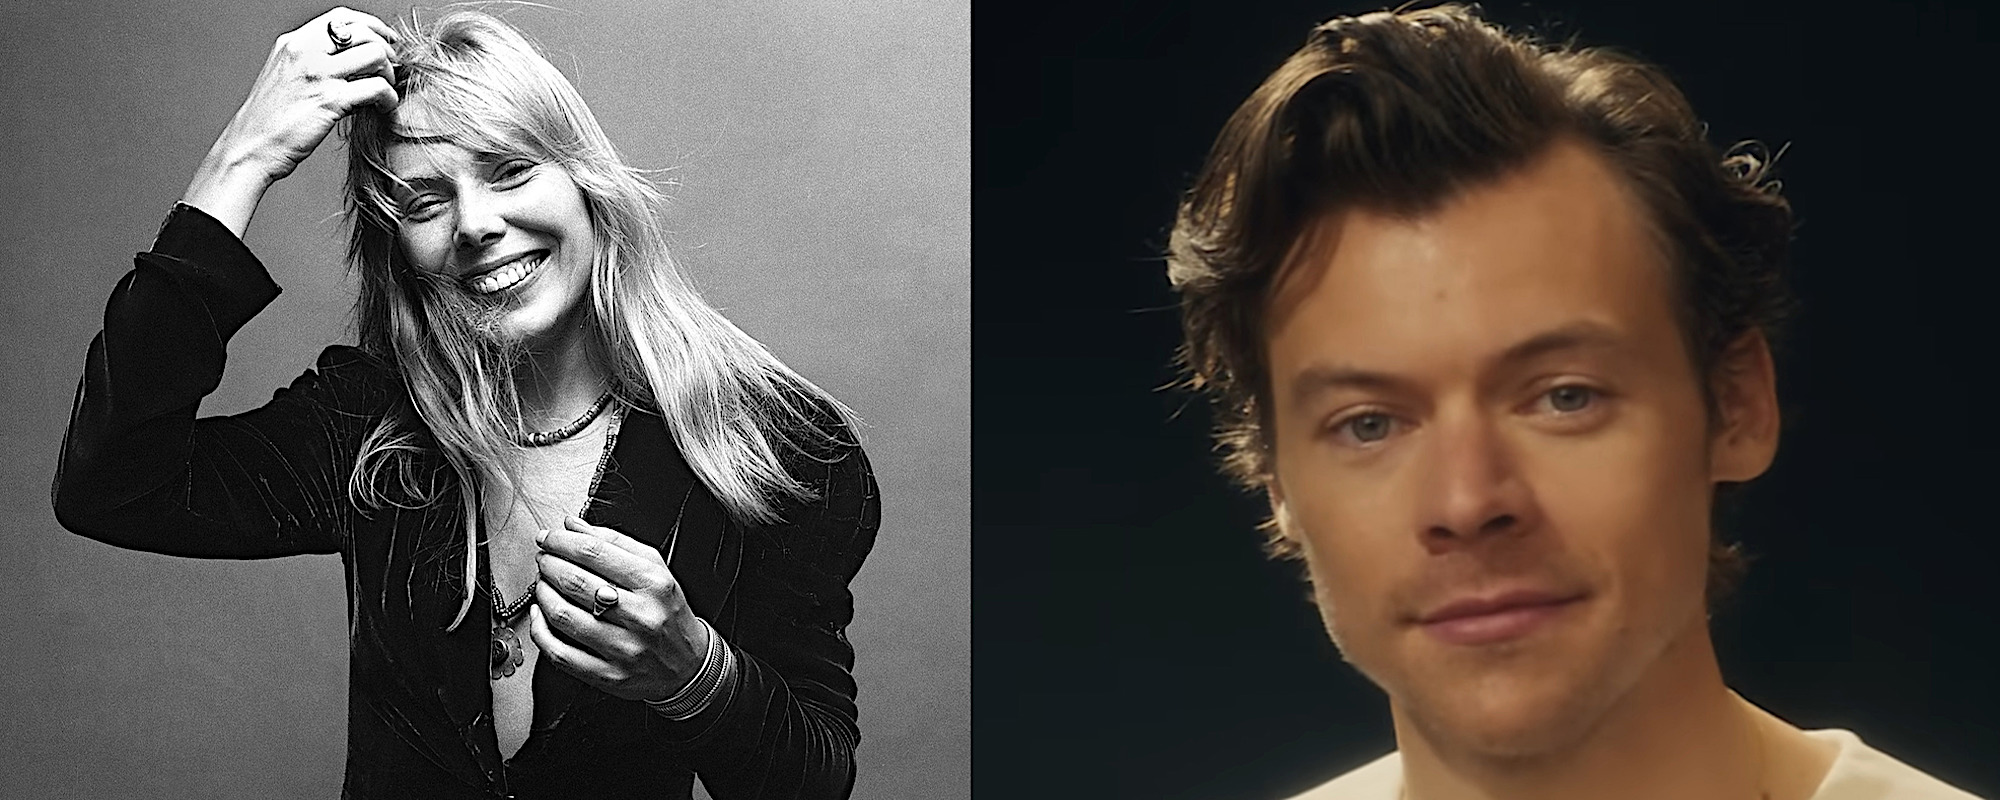 Joni Mitchell Reacts to Harry Styles’ New Album: “Love the Title”